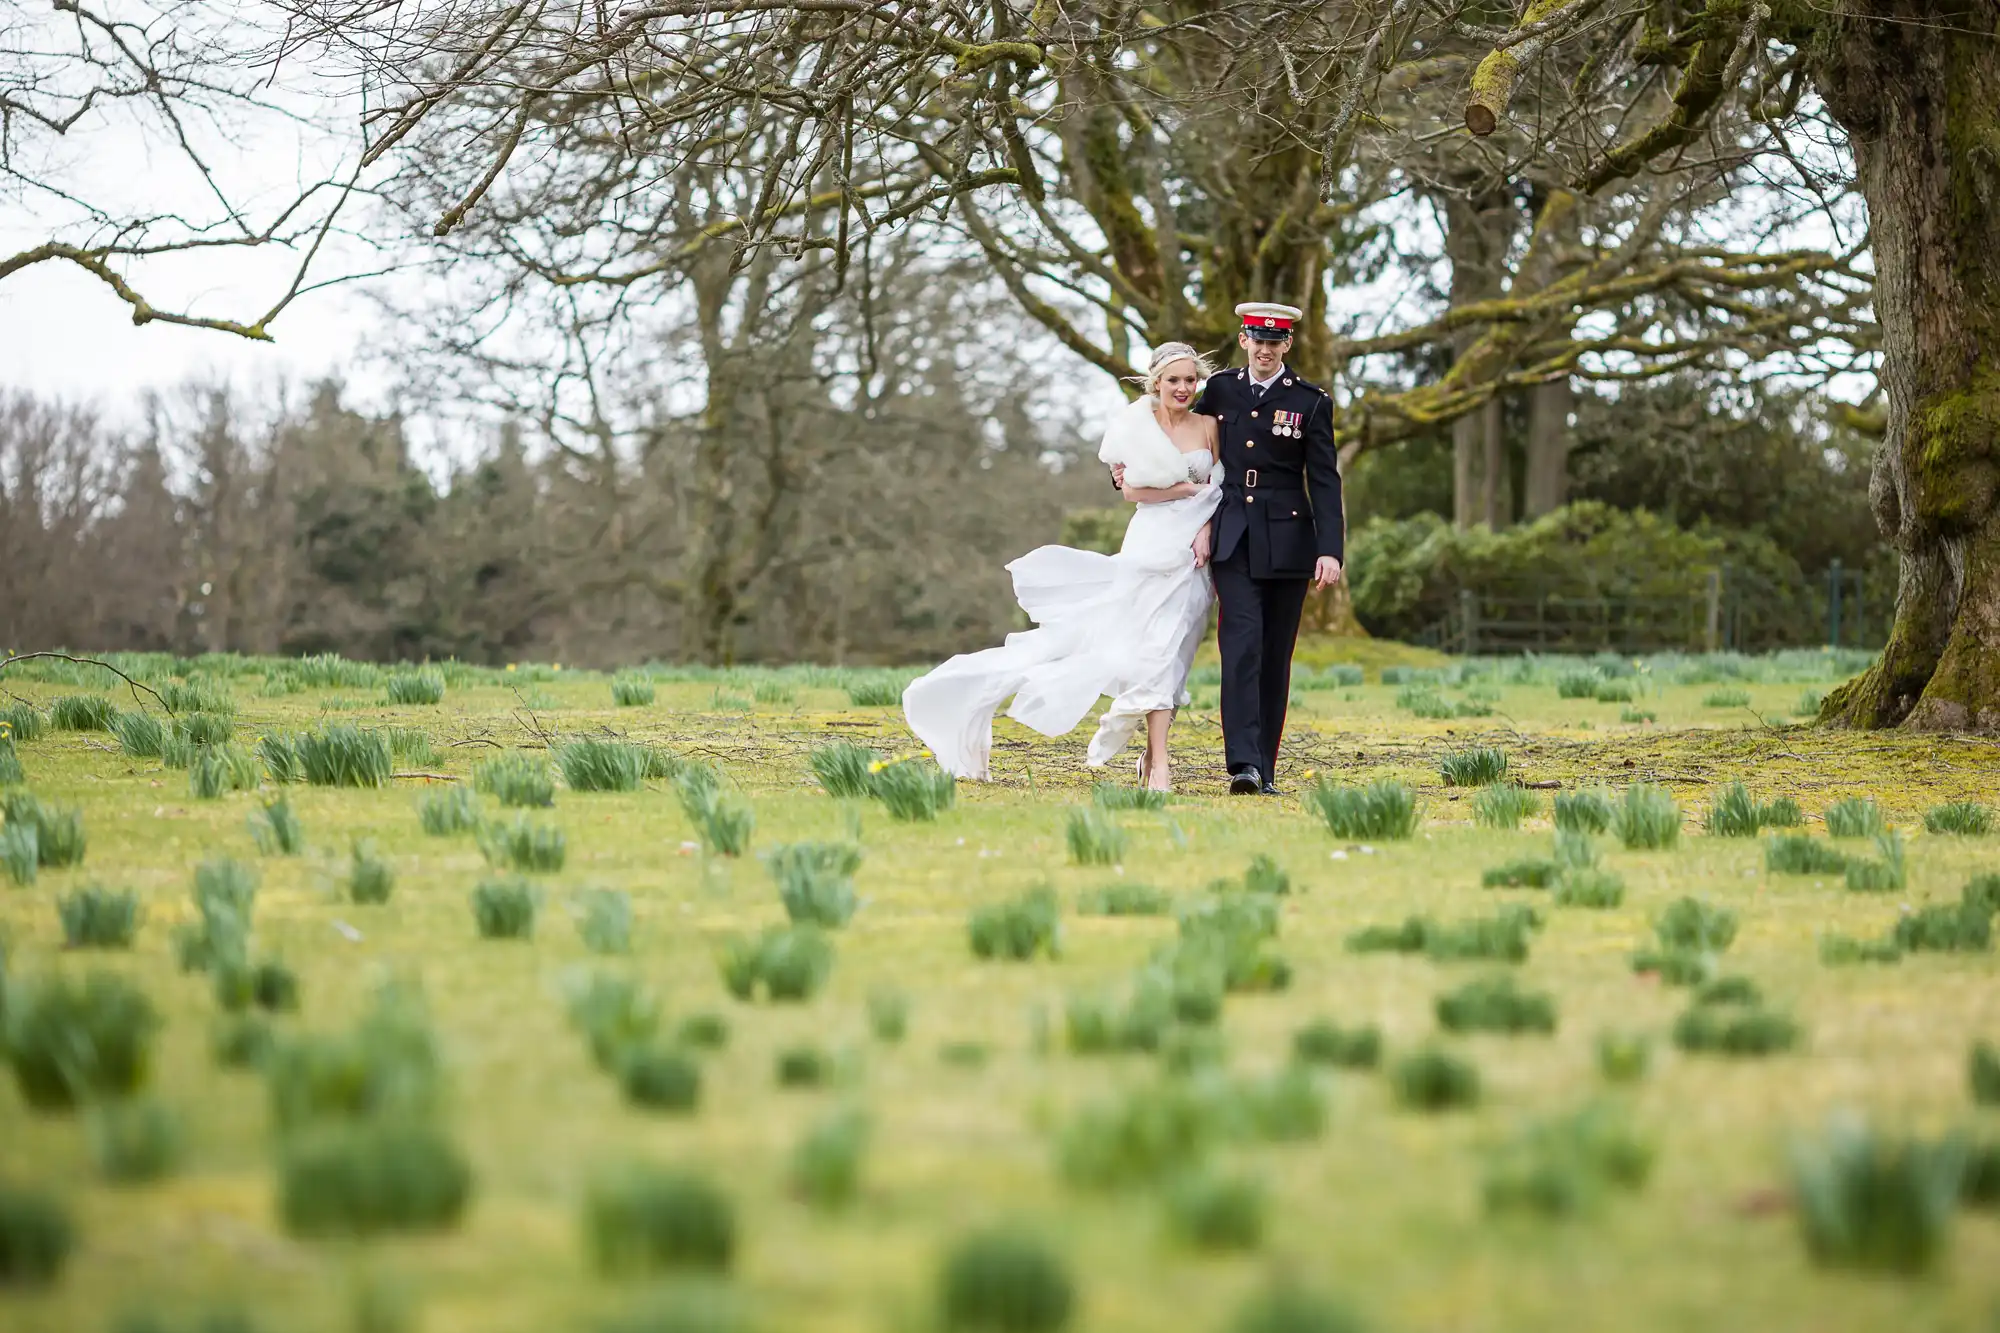 A bride and a uniformed groom walk through a grassy field with scattered plants and bare trees in the background. The bride's dress flows in the wind.